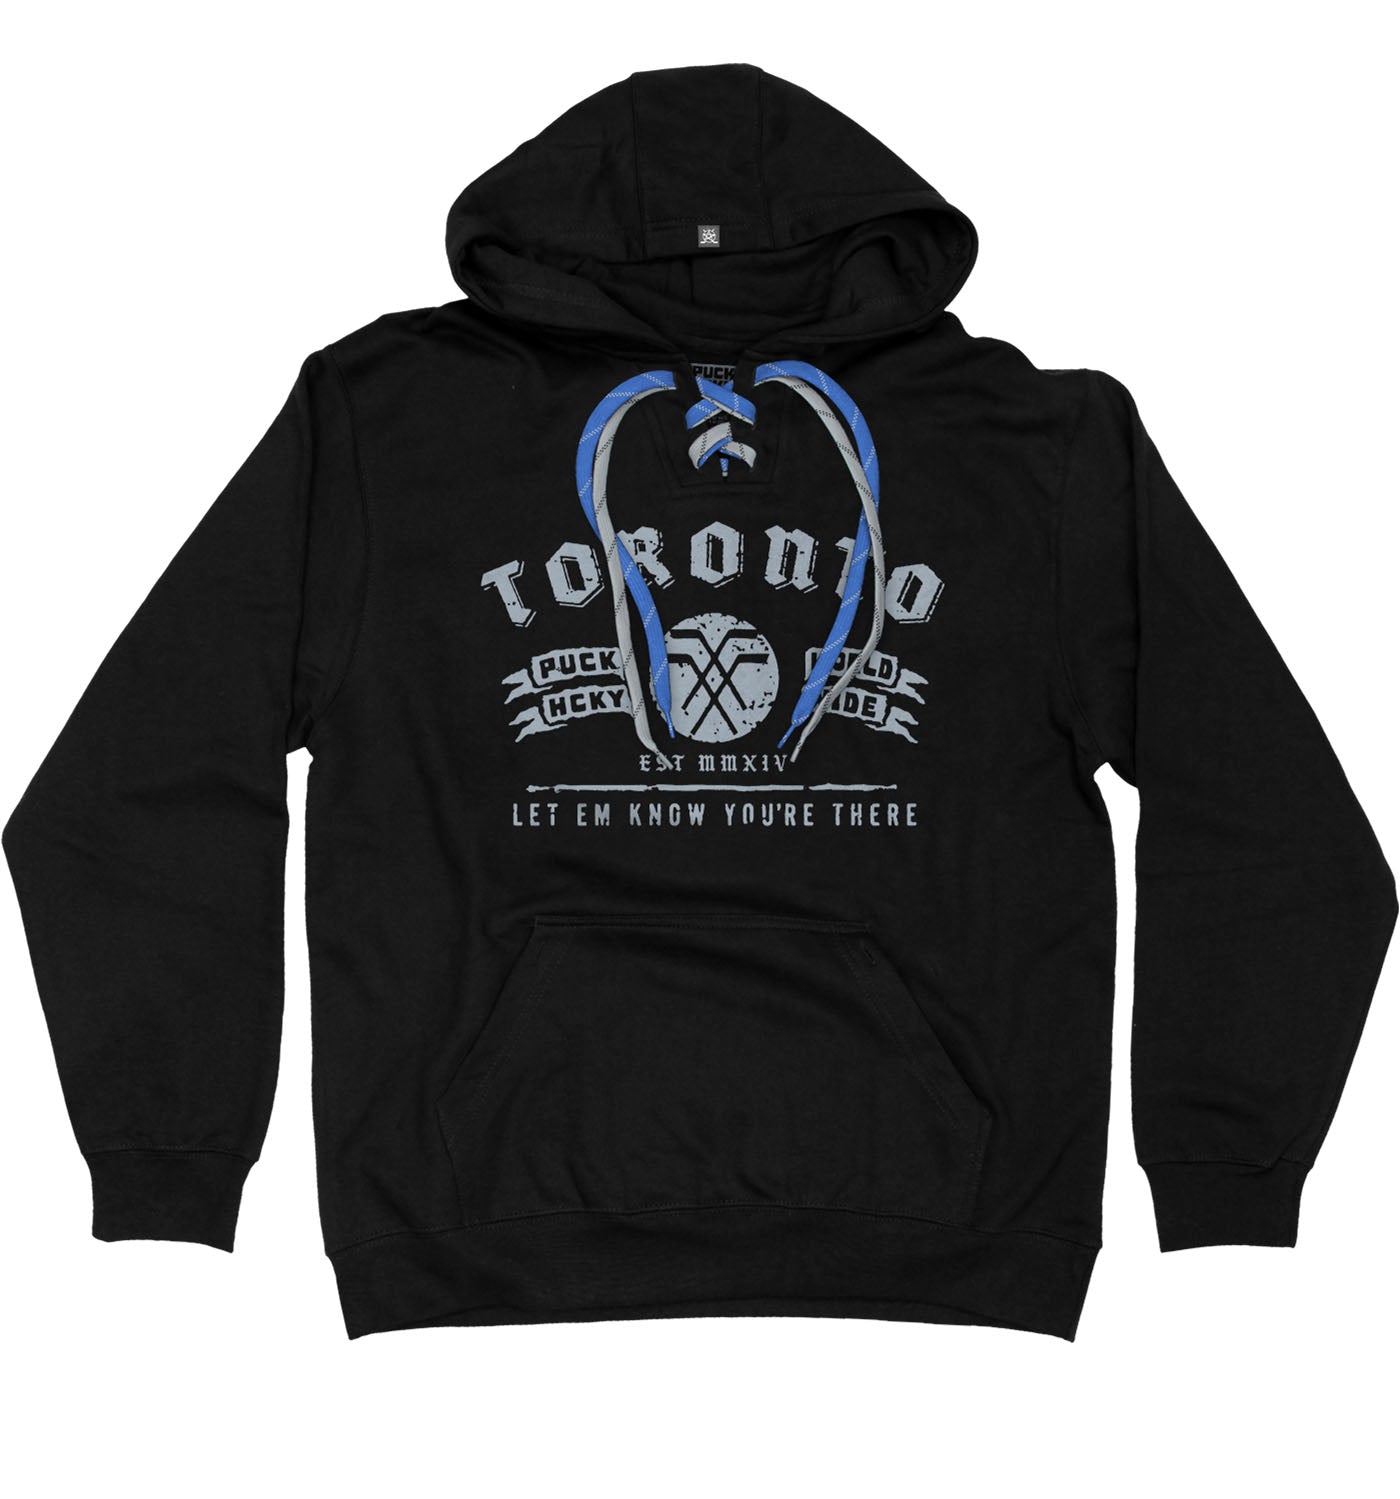 PUCK HCKY 'TORONTO' laced pullover hockey hoodie in black front view